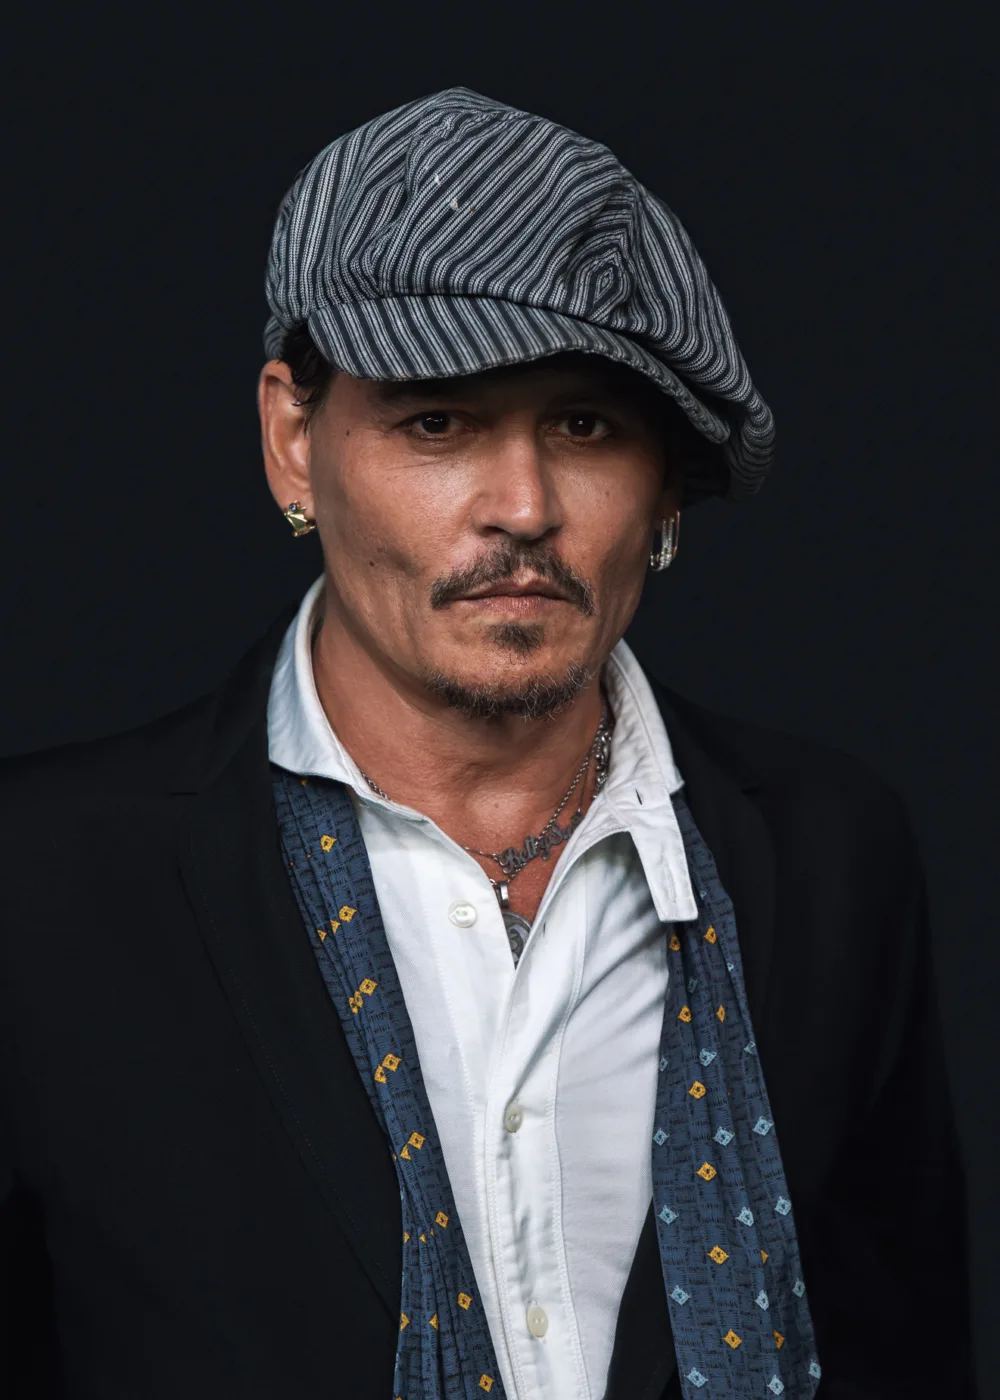 Johnny Depp is a versatile American actor, producer, and musician known for his iconic performances in a range of films. Born on June 9, 1963, in Owensboro, Kentucky, Depp began his career in the entertainment industry as a musician before transitioning to acting. He gained early recognition for his role on the hit TV show 21 Jump Street, but it was his work in films like Edward Scissorhands, Pirates of the Caribbean, and Sweeney Todd: The Demon Barber of Fleet Street that made him a household name. Depp is known for his ability to inhabit complex and unconventional characters, and has become a cult icon for his portrayals of eccentric and offbeat characters. He has received numerous awards and nominations for his work, including three Academy Award nominations and a Golden Globe Award. In addition to his film work, Depp is also an accomplished musician and has played in several bands over the years. Despite his success, Depp has also faced personal challenges, including a tumultuous and publicized divorce and legal battles. Nonetheless, he remains a respected and influential figure in the entertainment industry, with a dedicated fanbase around the world.